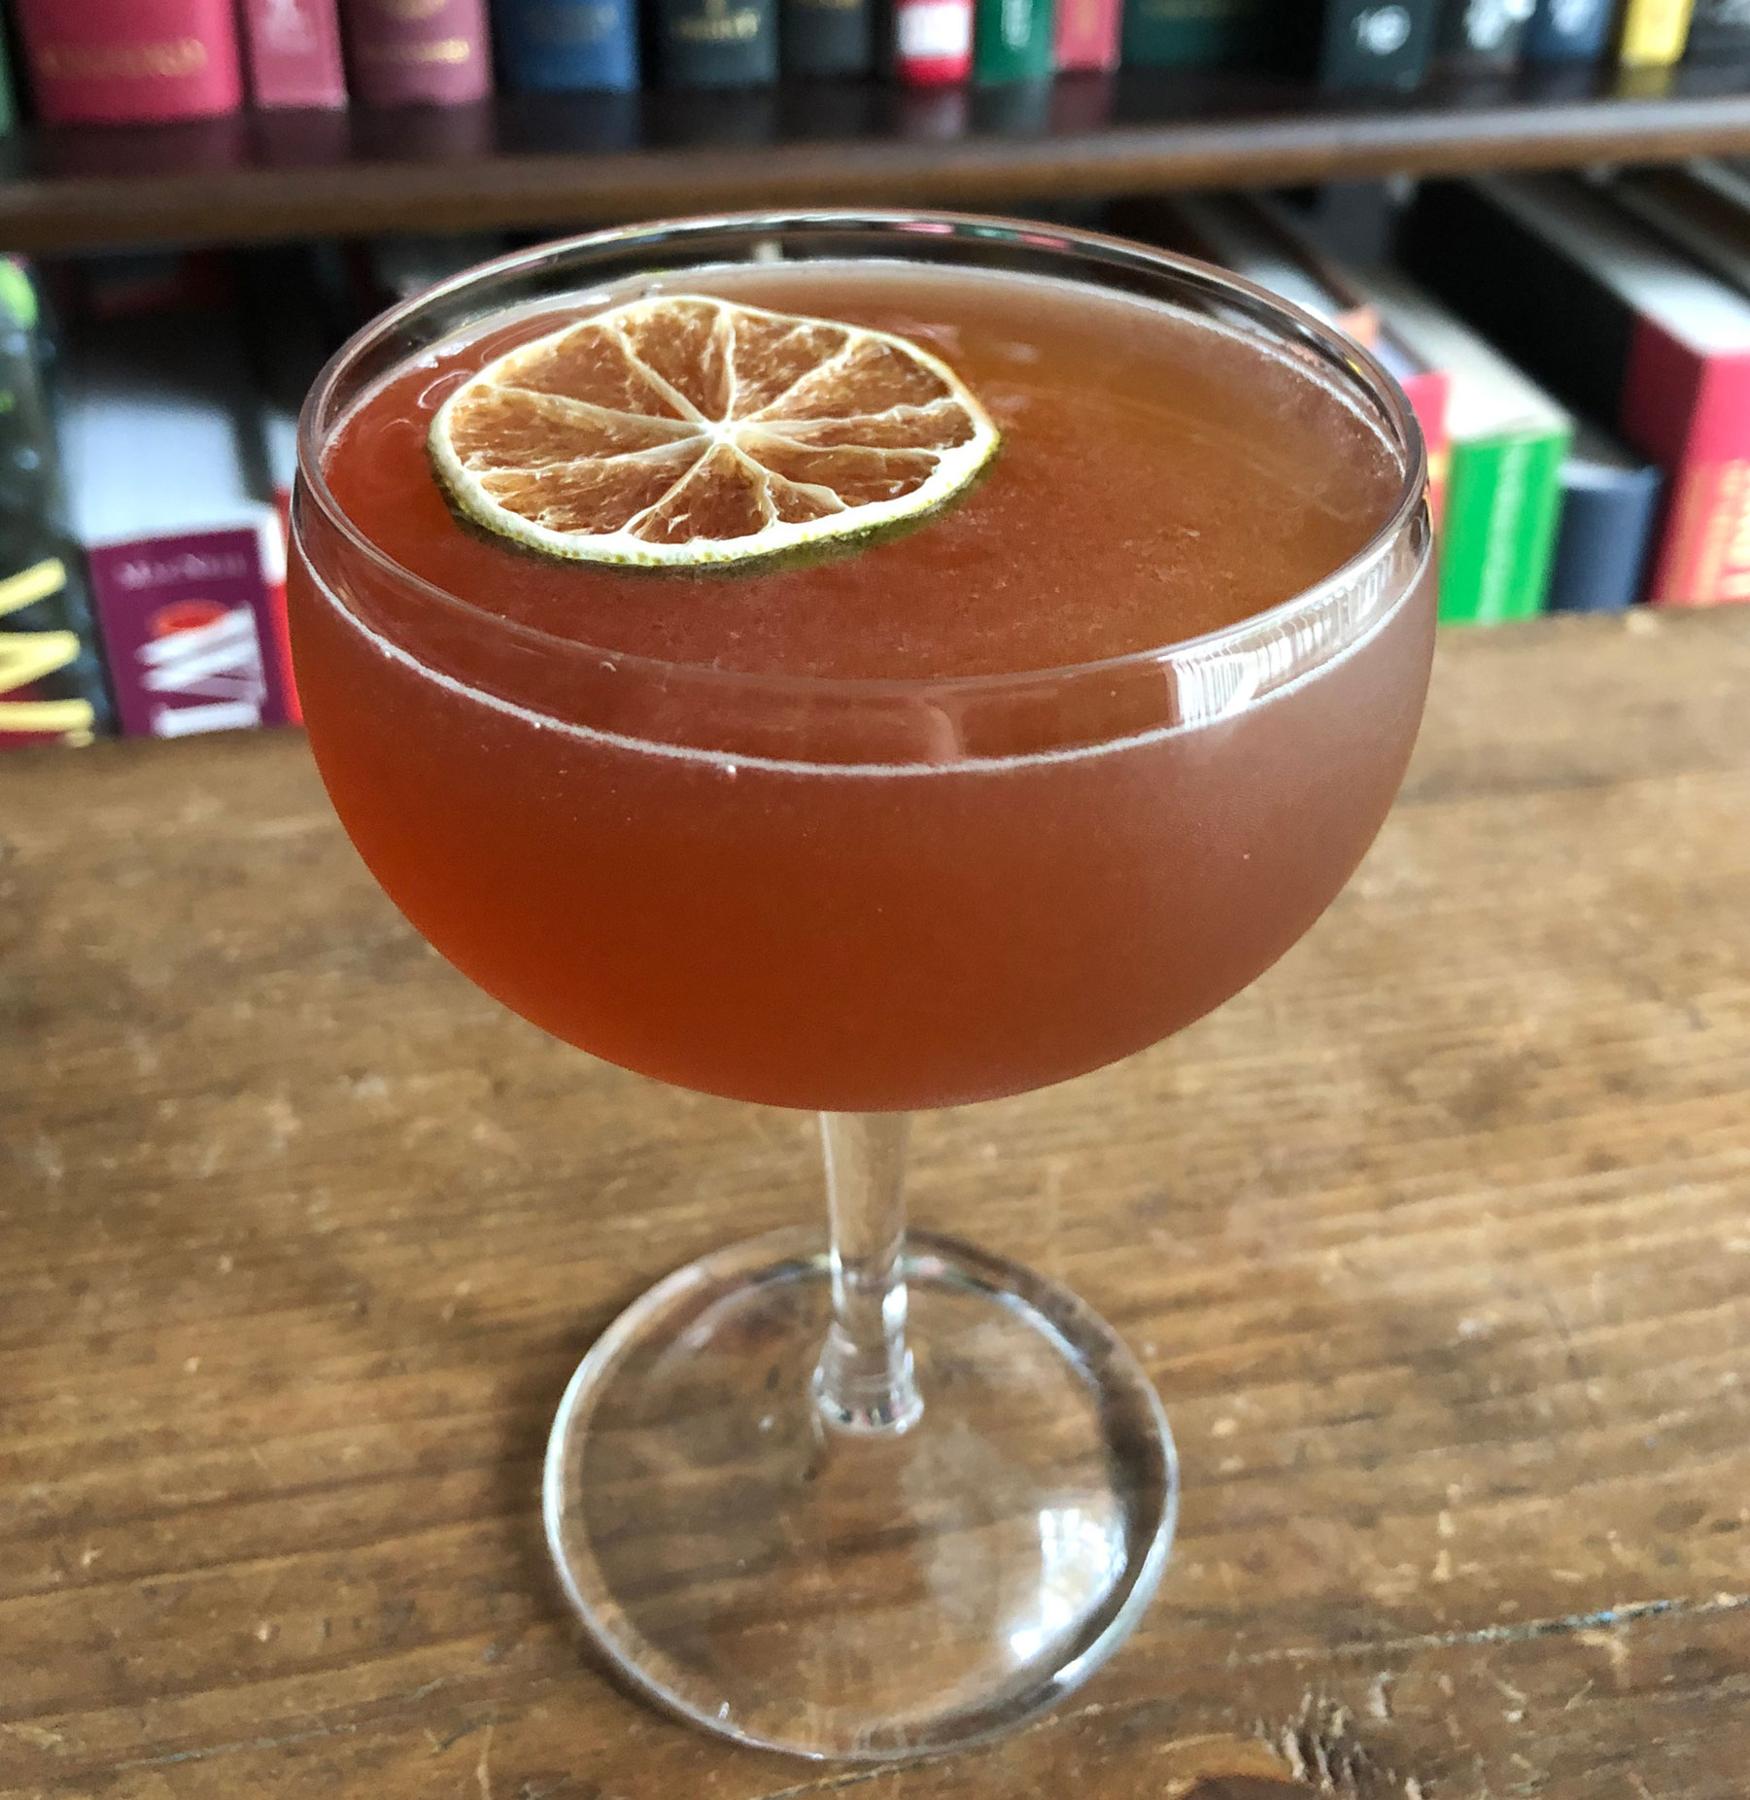 An example of the Millionaire No. 1, the mixed drink (drink), by Savoy Cocktail Book, featuring Hayman’s Sloe Gin, Smith & Cross Traditional Jamaica Rum, Blume Marillen Apricot Eau-de-Vie, lime juice, grenadine, rich simple syrup, and lime wheel; photo by Lee Edwards